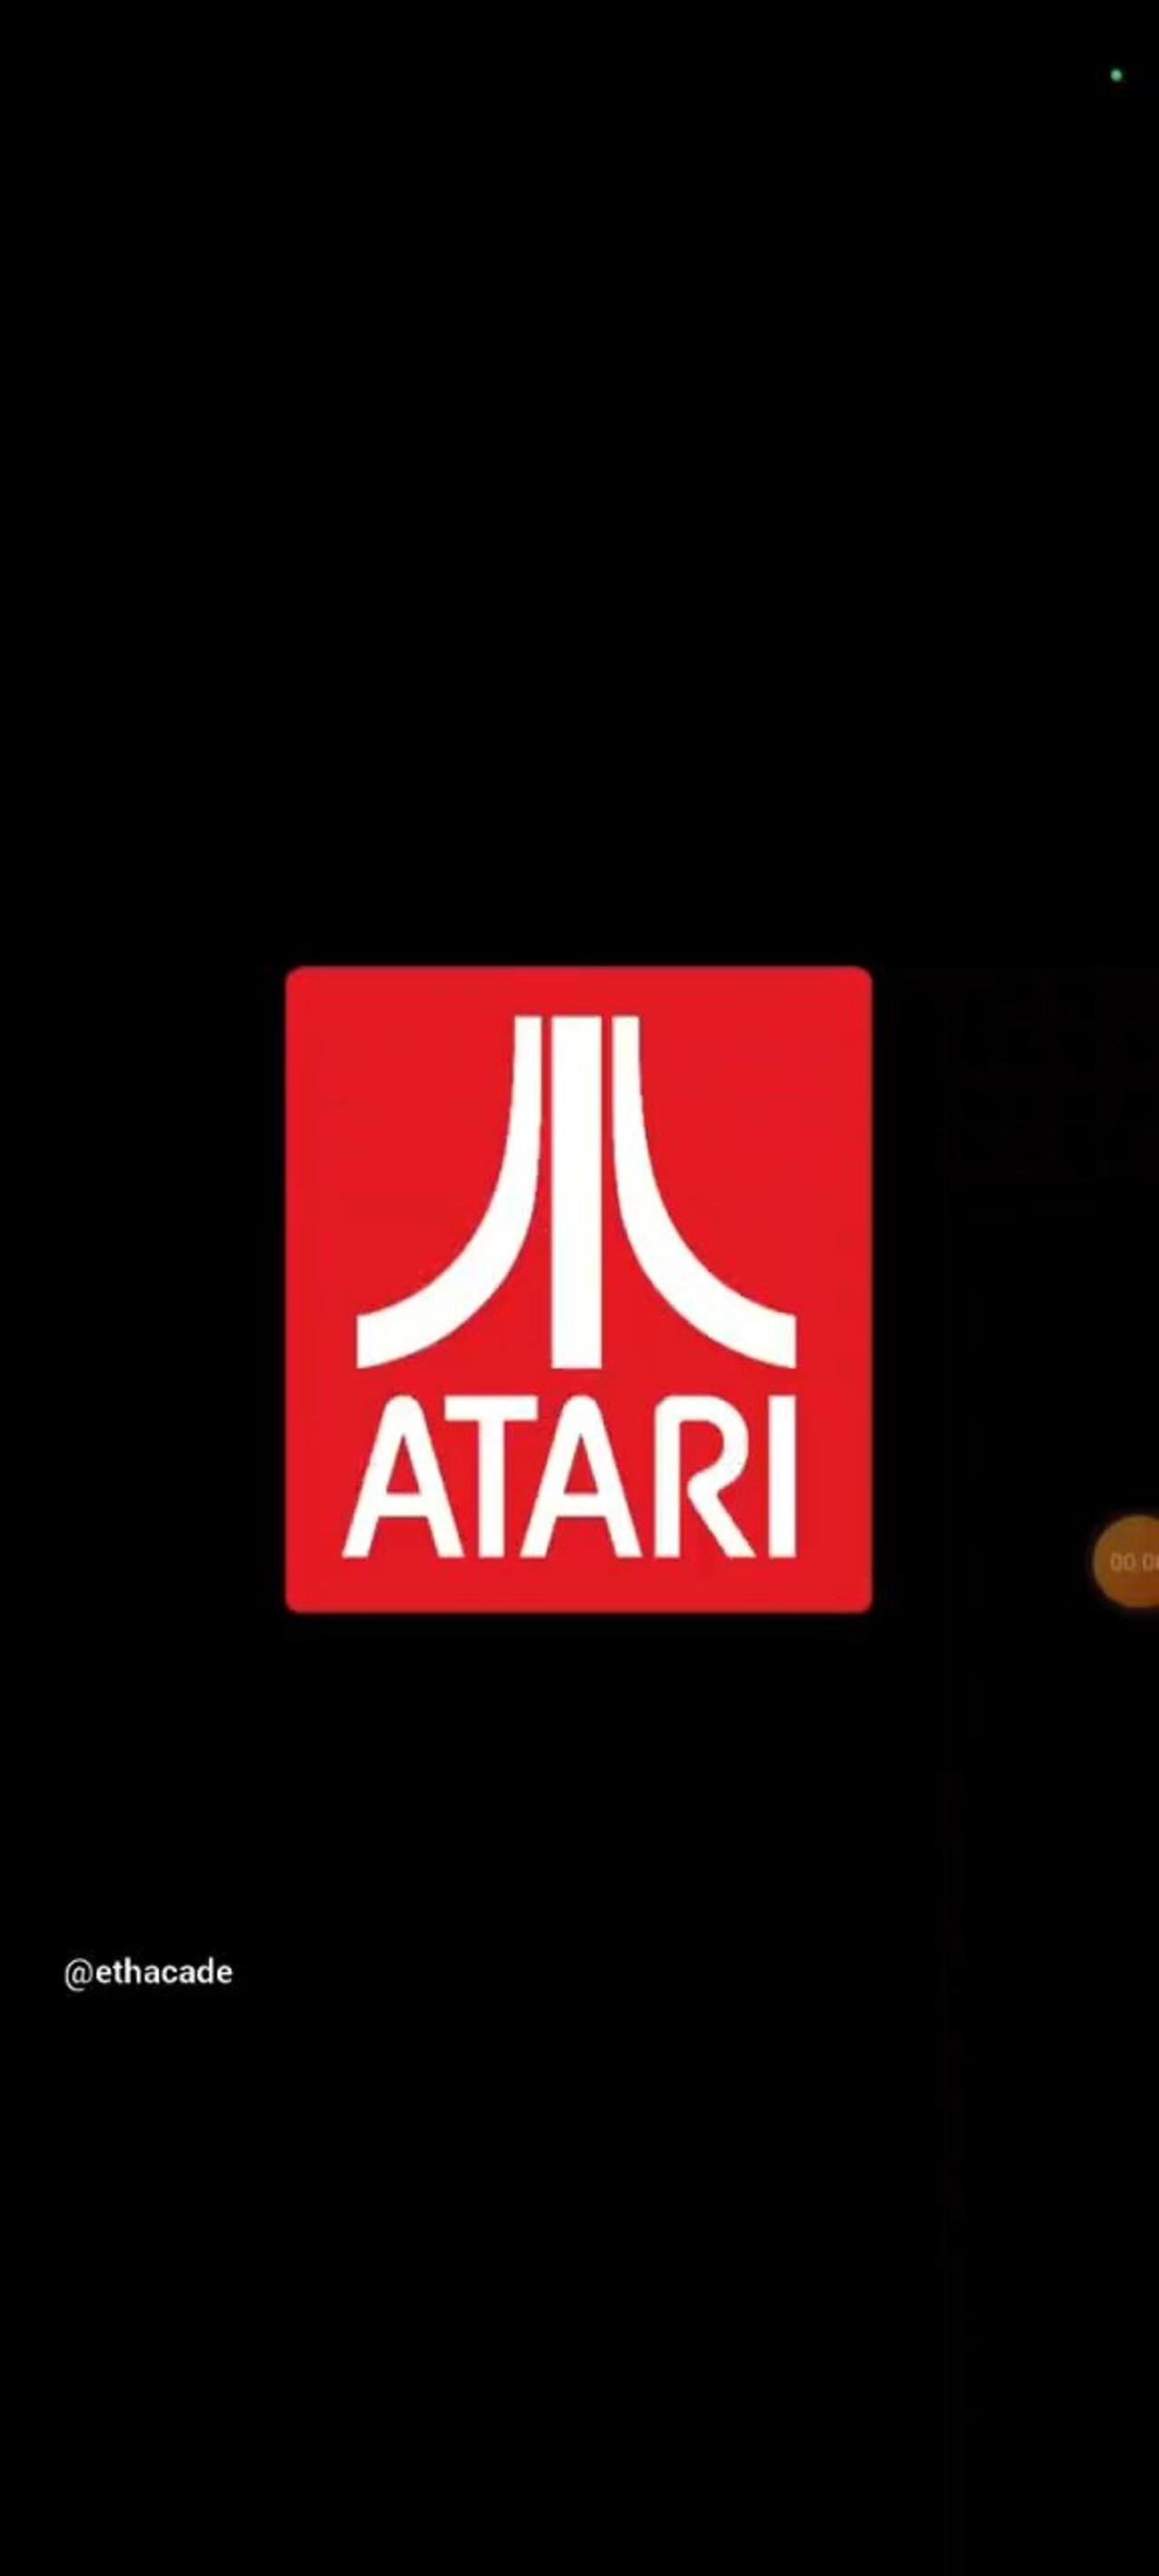 Atari Needs To Revive This Game Franchise